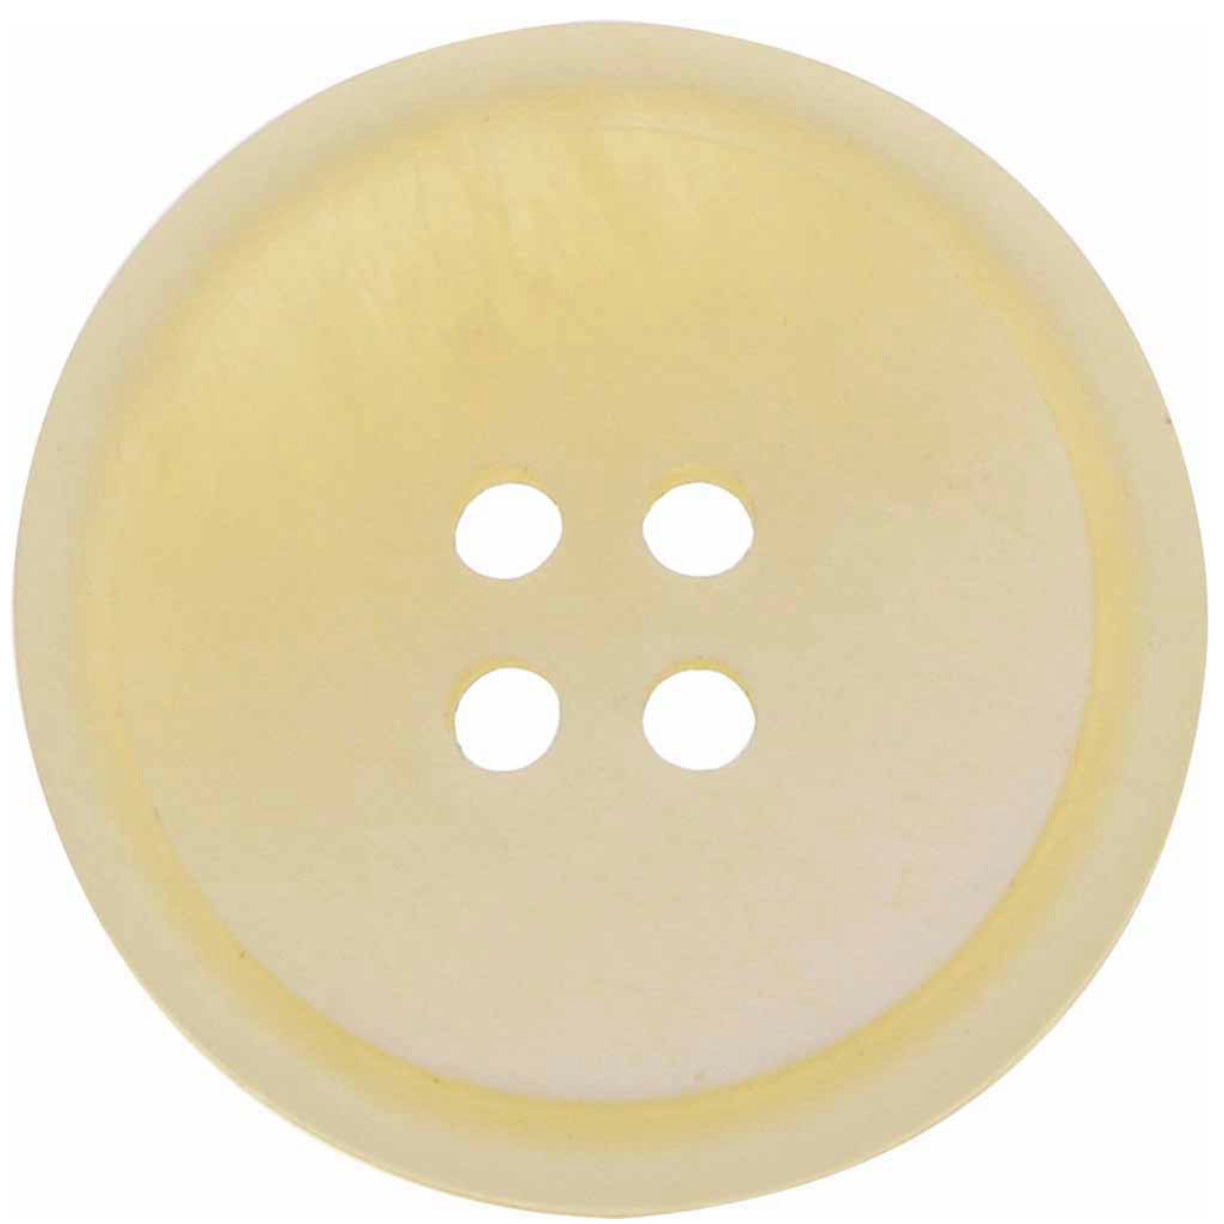 Four-Hole Button - 25mm - 2 count